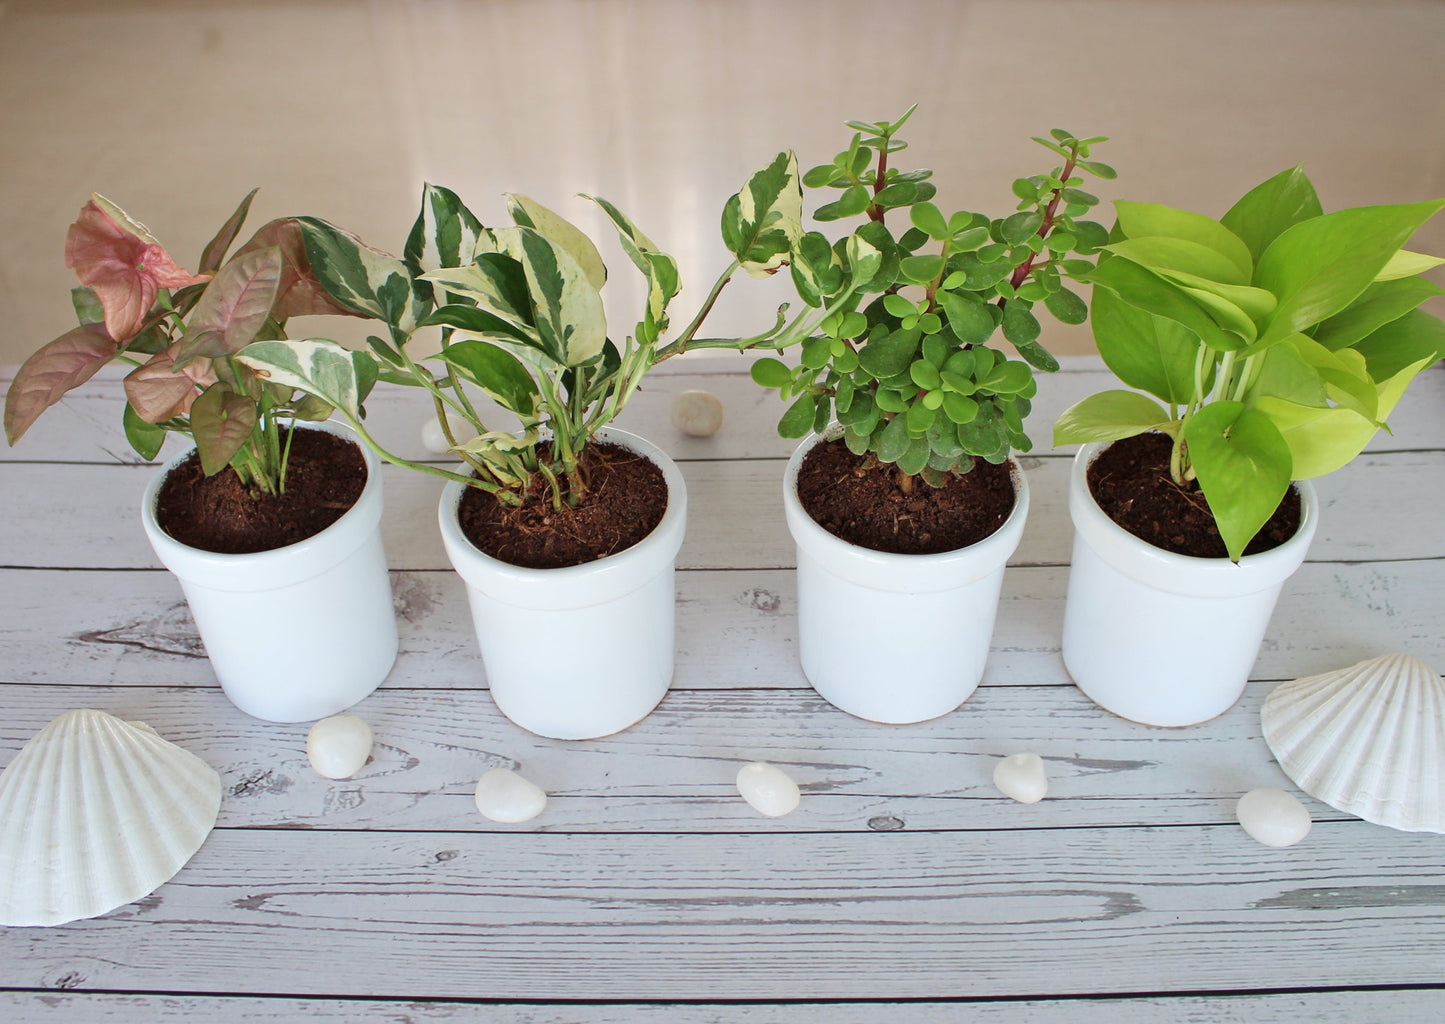 Rolling Nature Combo of Live Indoor Plants for Home Jade Plant, Golden Pothos, Pink Syngonium and Njoy Money Plant in White Jar Glacier Ceramic Pots